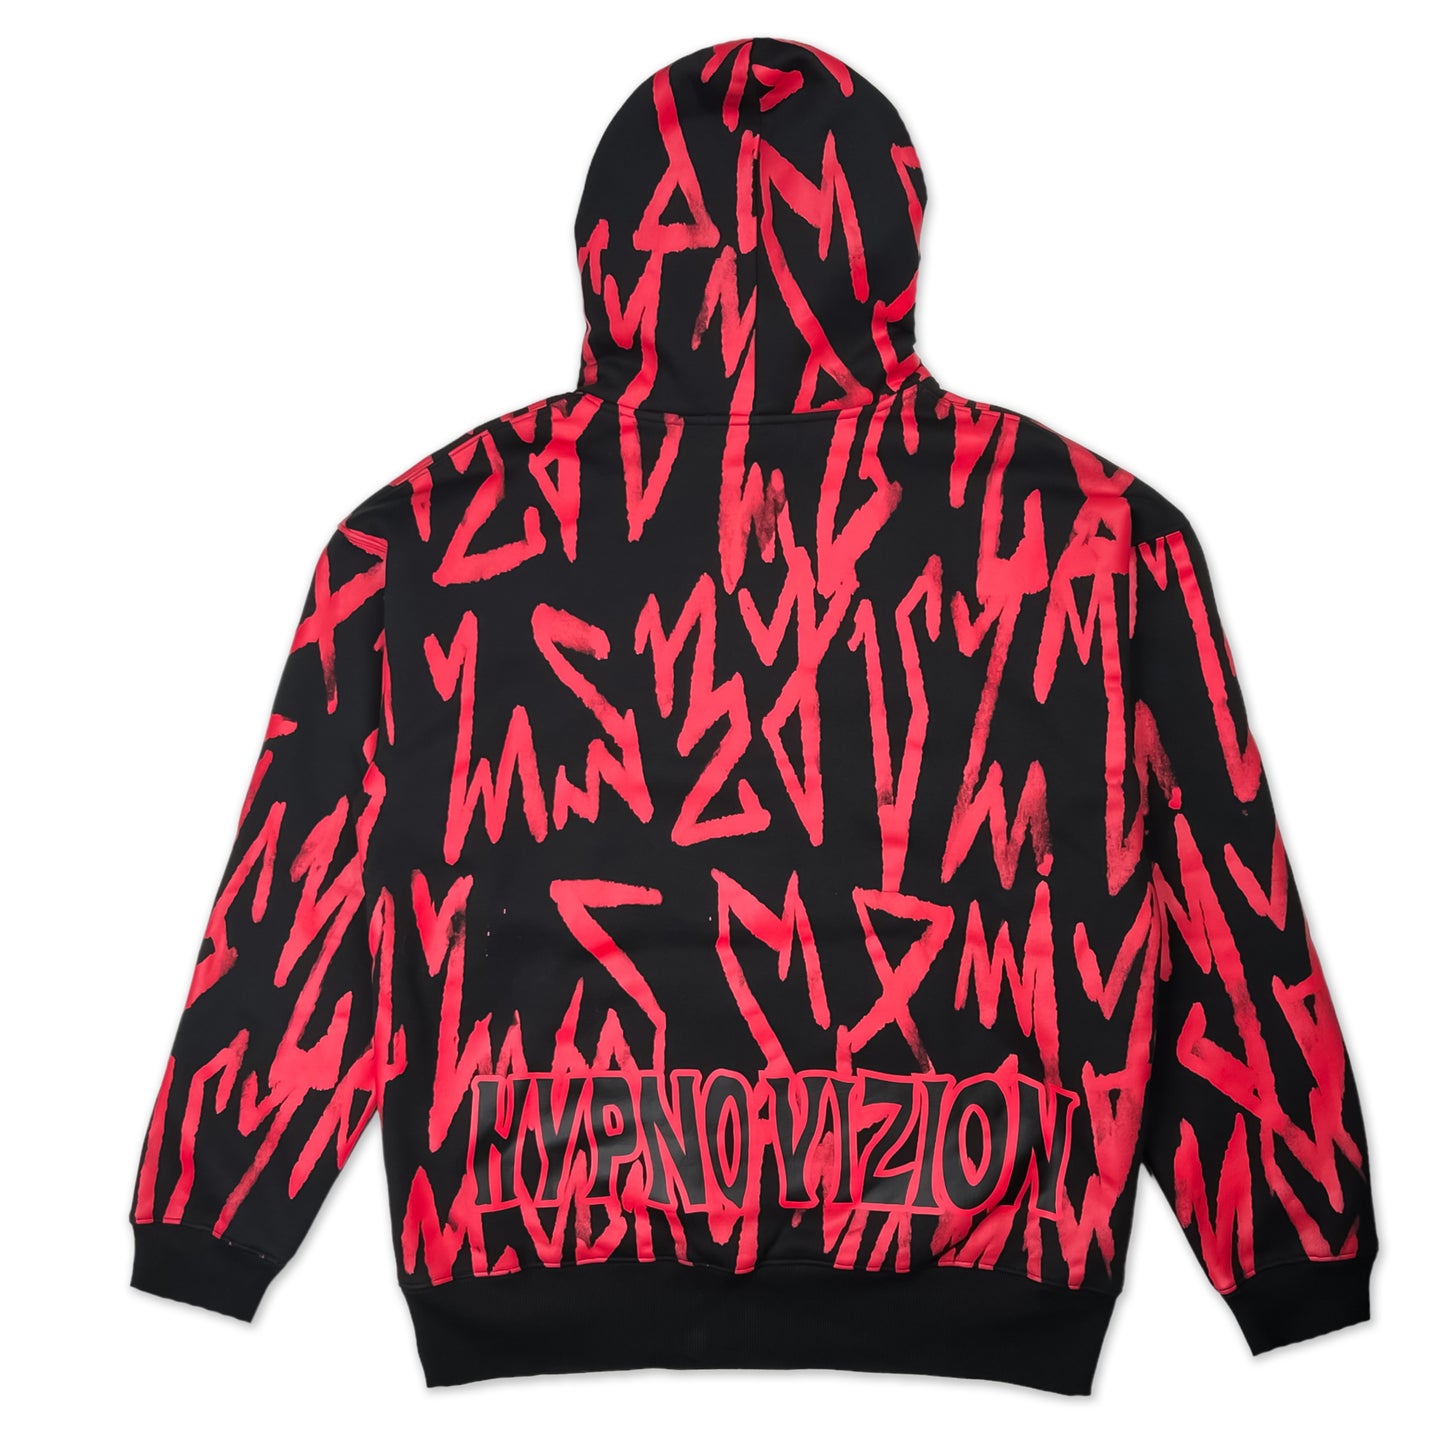 HypnoVizion - No Such Thing Pullover Hoodie